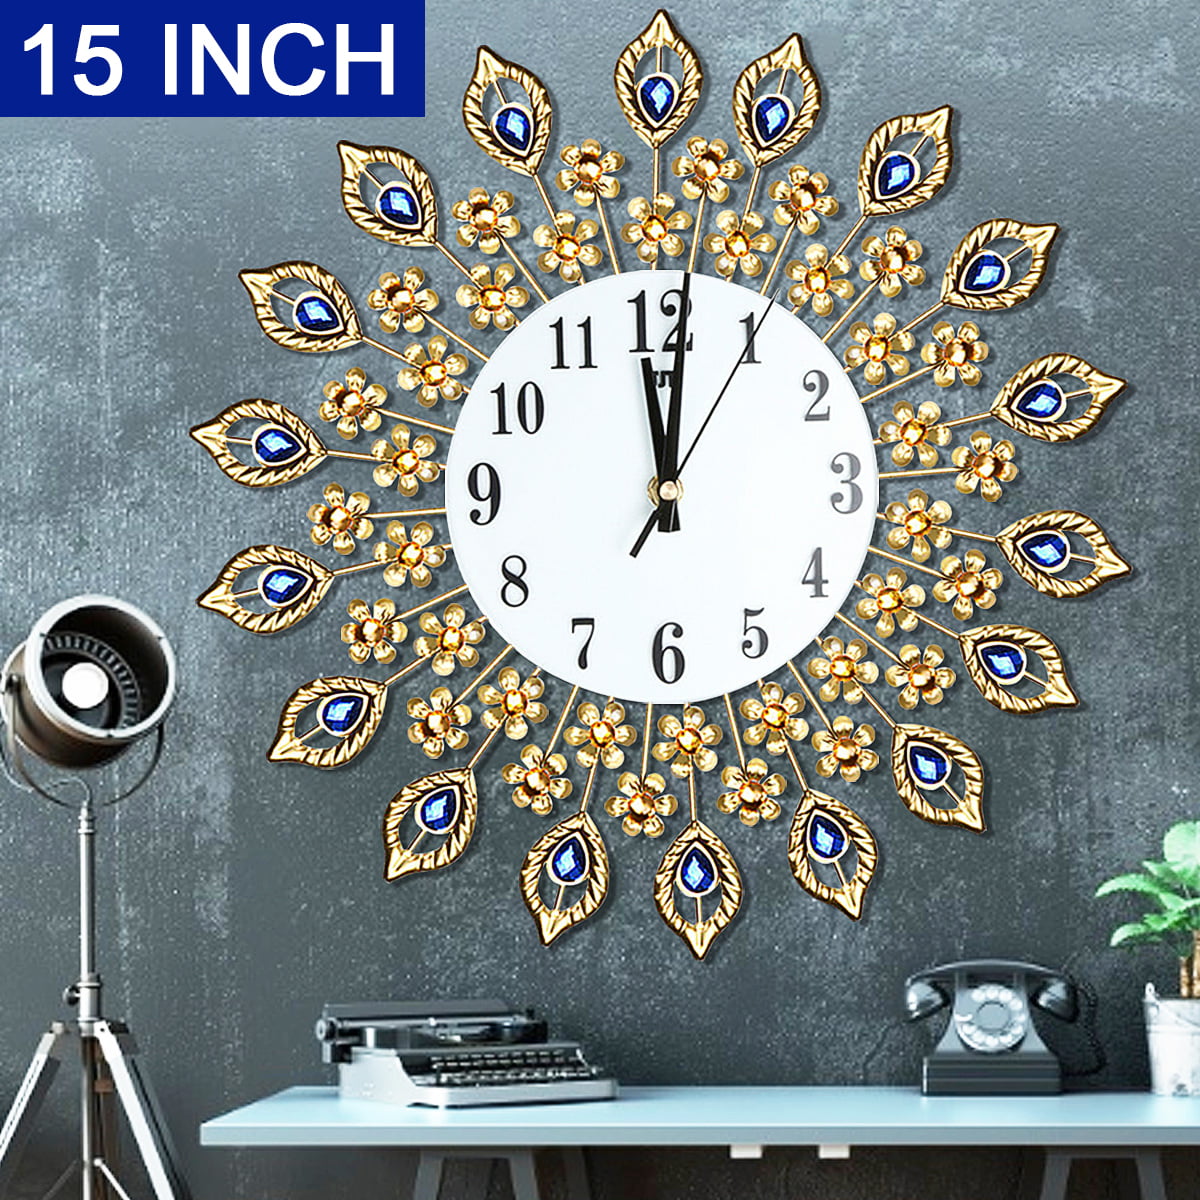 Beautiful Large Metal Peacock Wall Clock Silent Crystal Gold Flowers Room Decor 